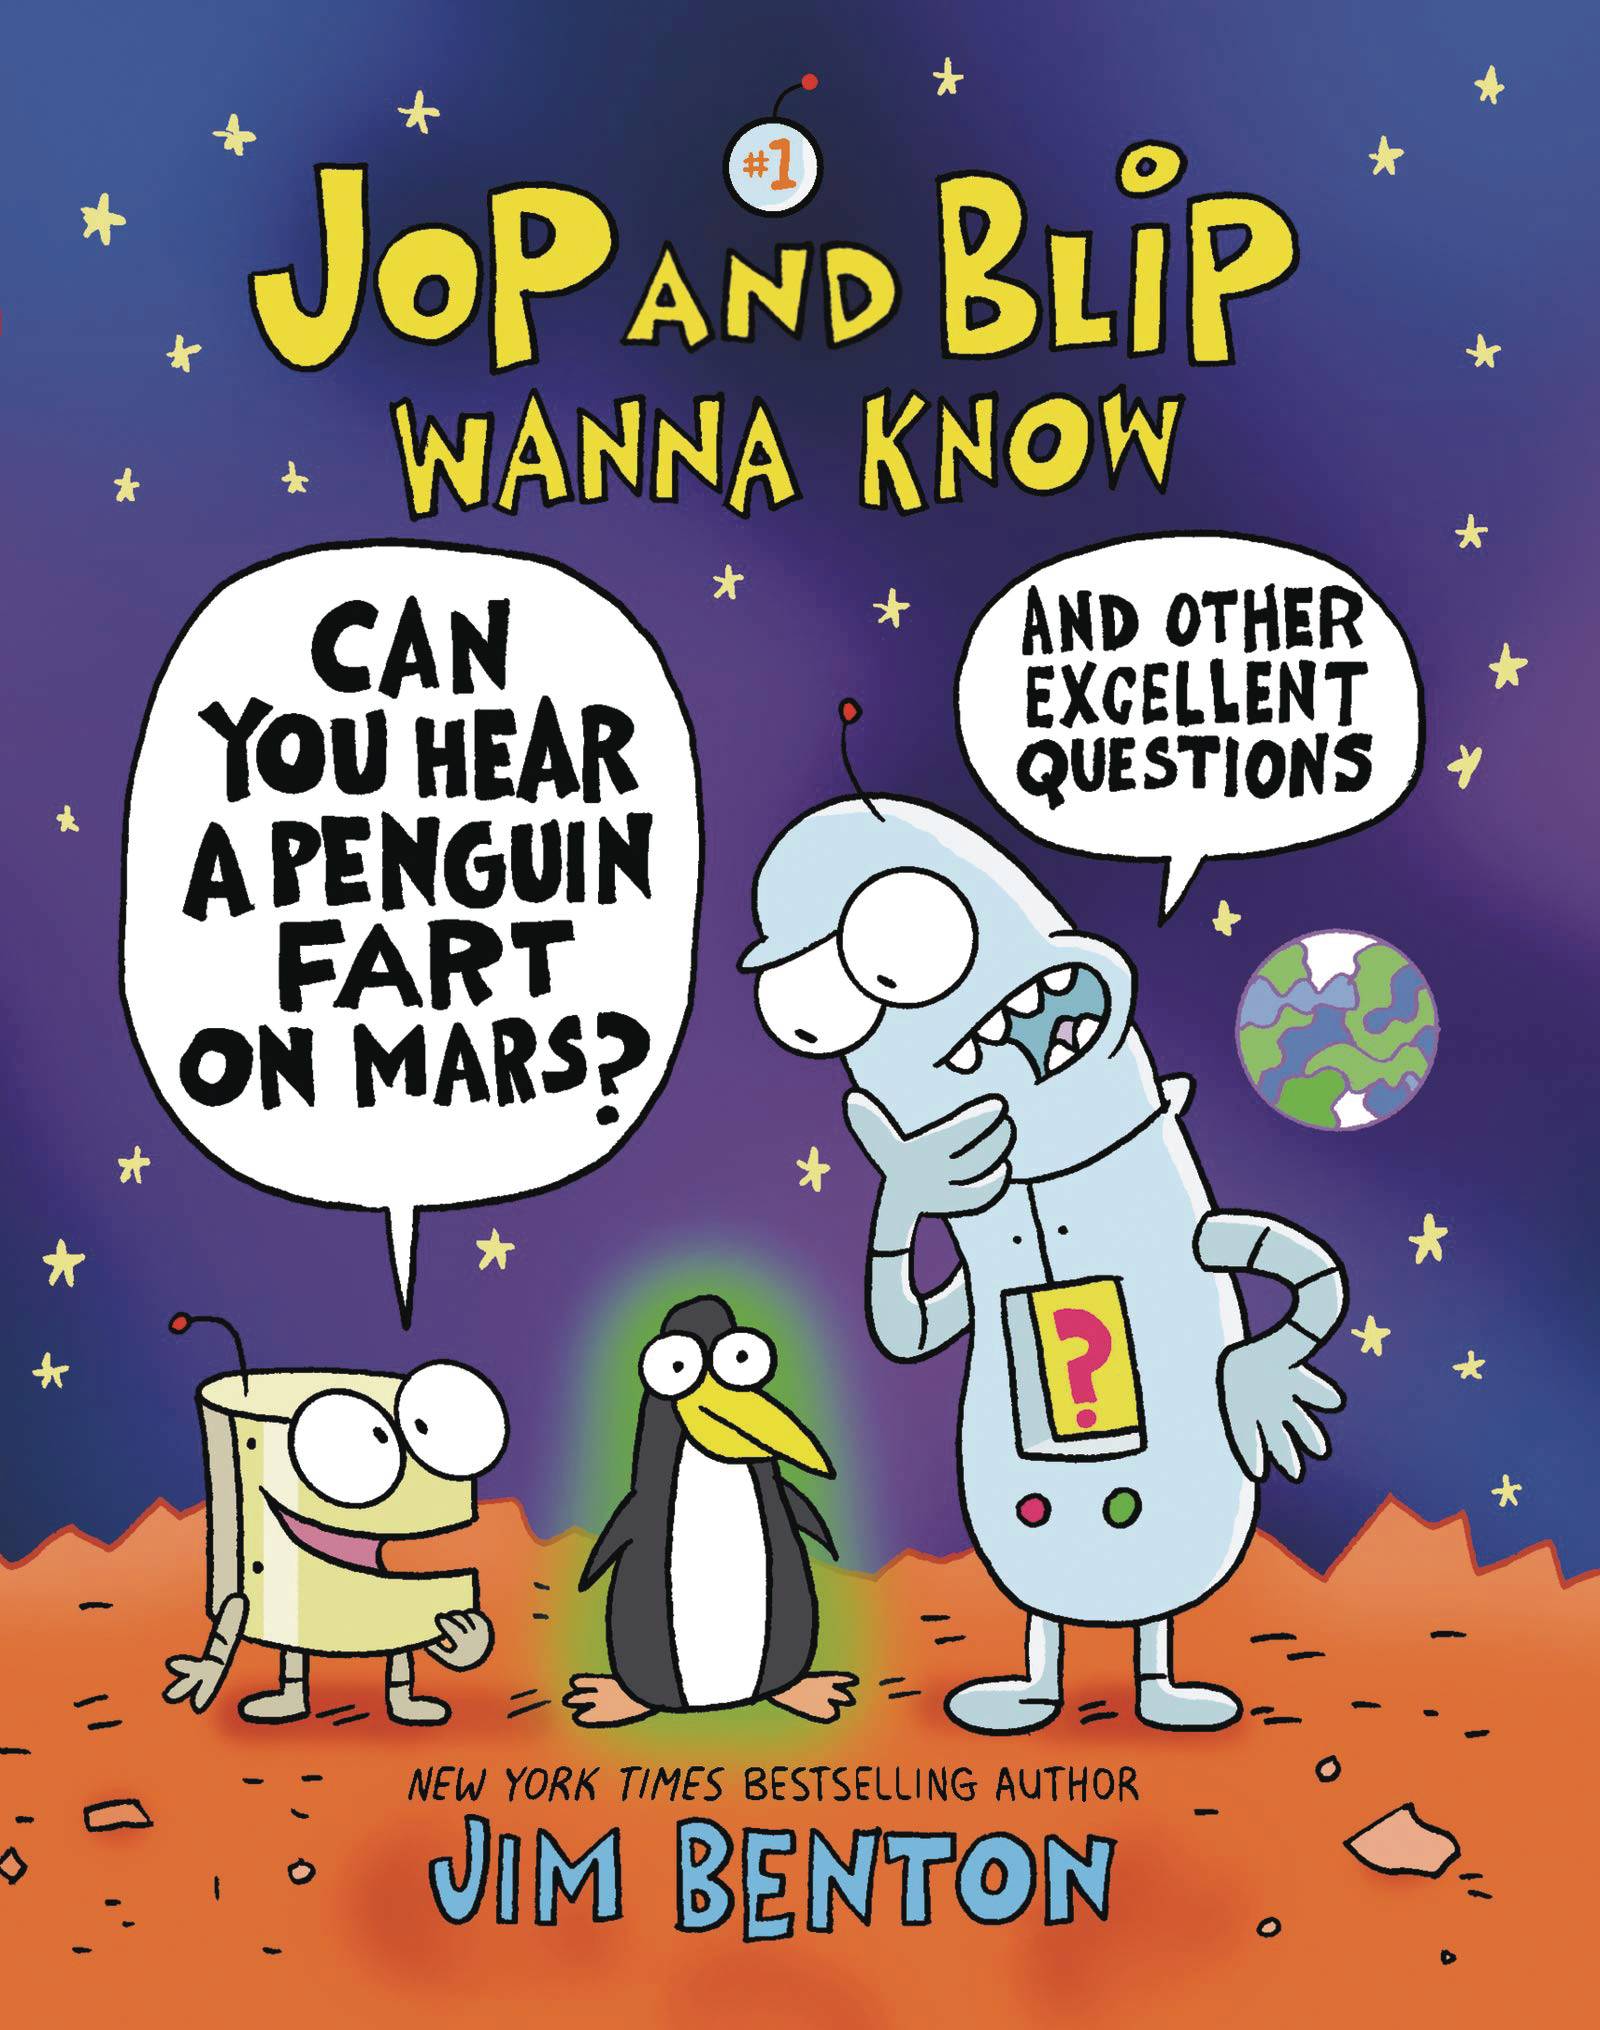 JOP AND BLIP WANNA KNOW GN CAN HEAR PENGUIN FART ON MARS